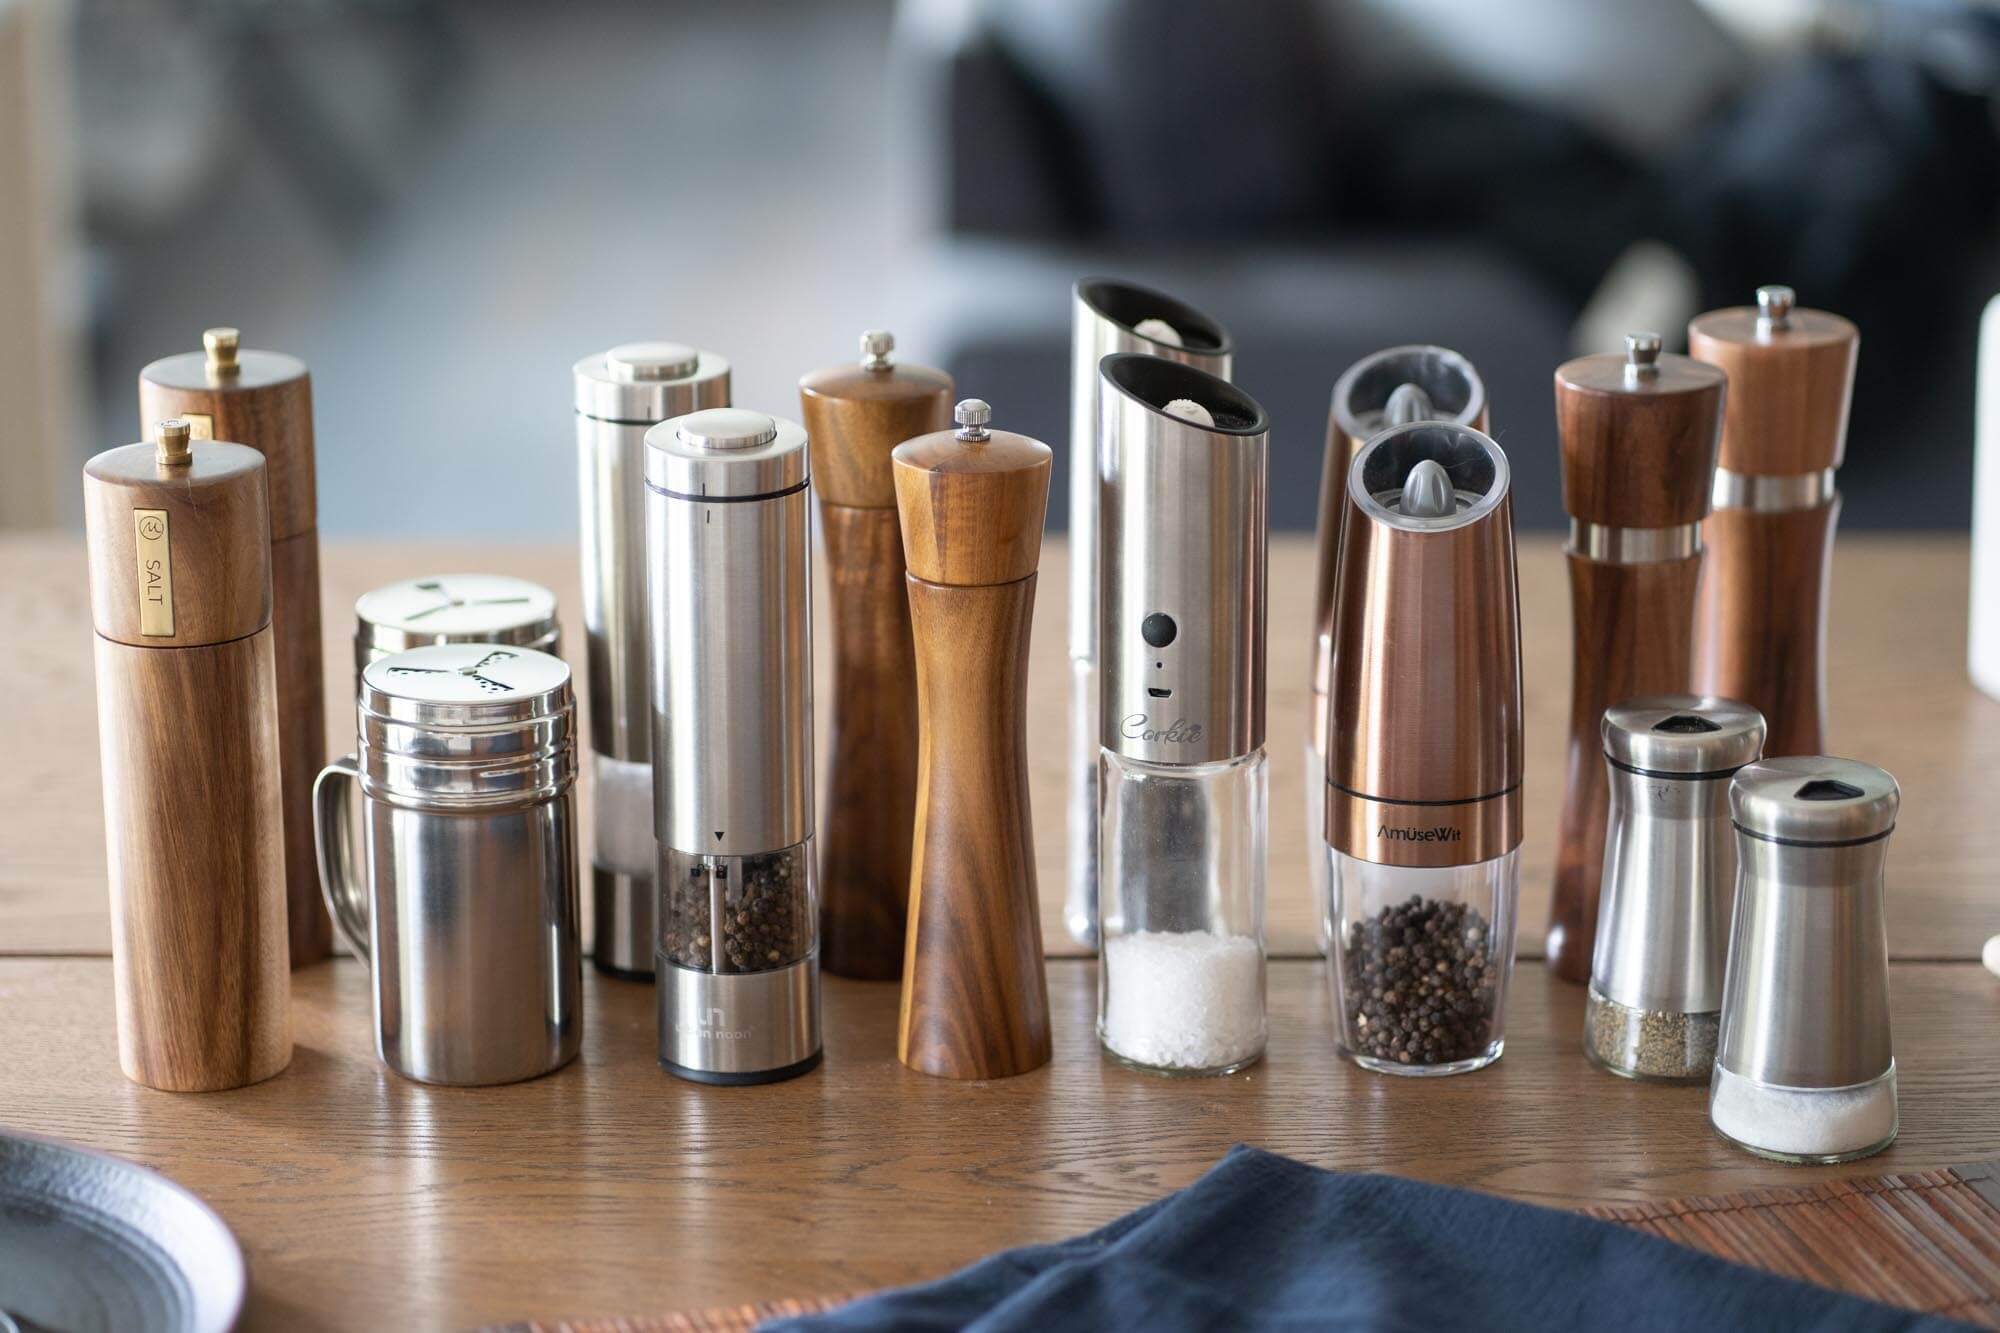 The 8 Best Salt and Pepper Grinders 2022 - Reviews by Your Best Digs